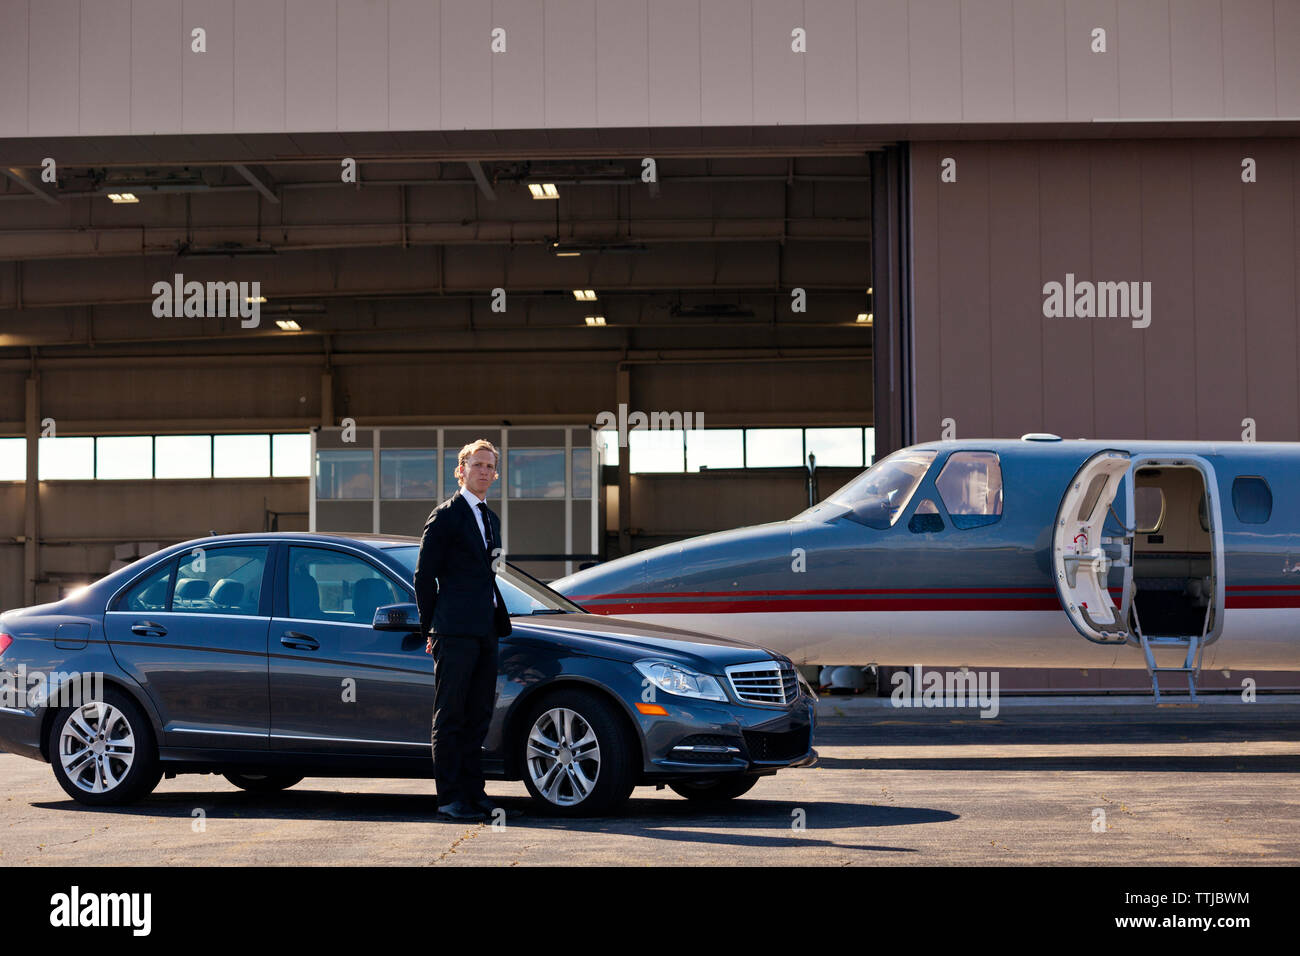 Portrait of businessman standing by car and airplane at airfield Stock Photo